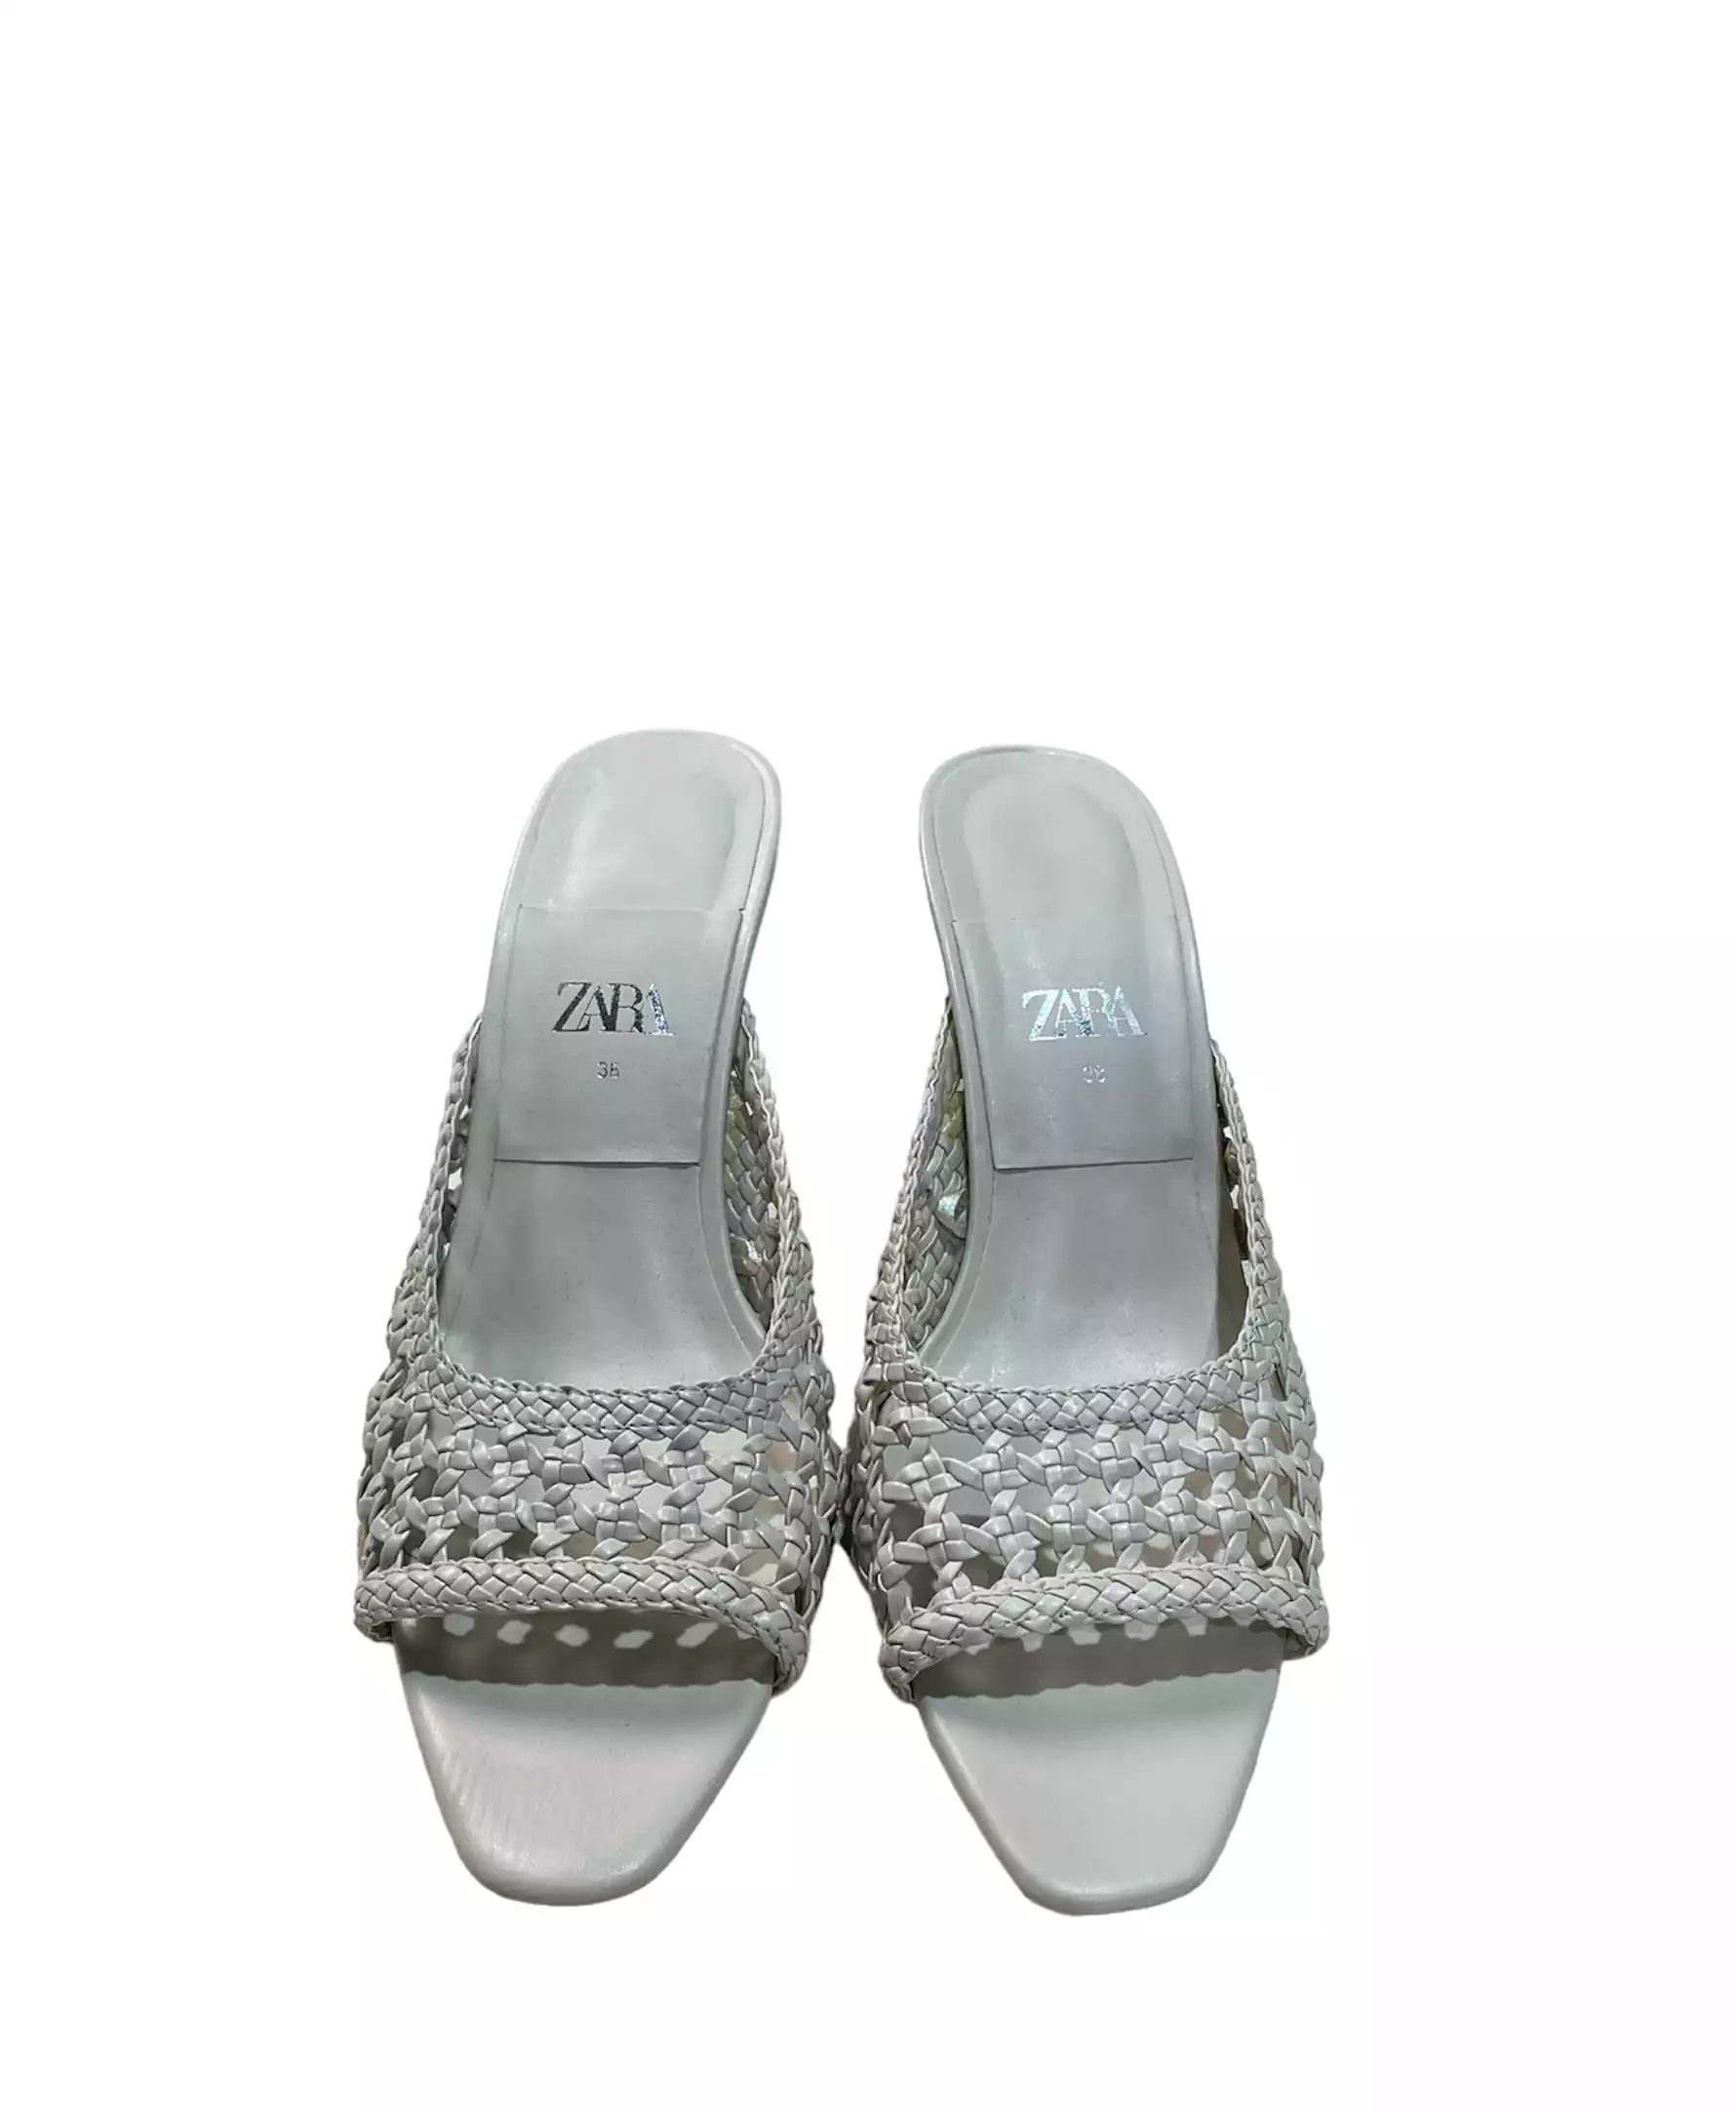 Shoes by Zara